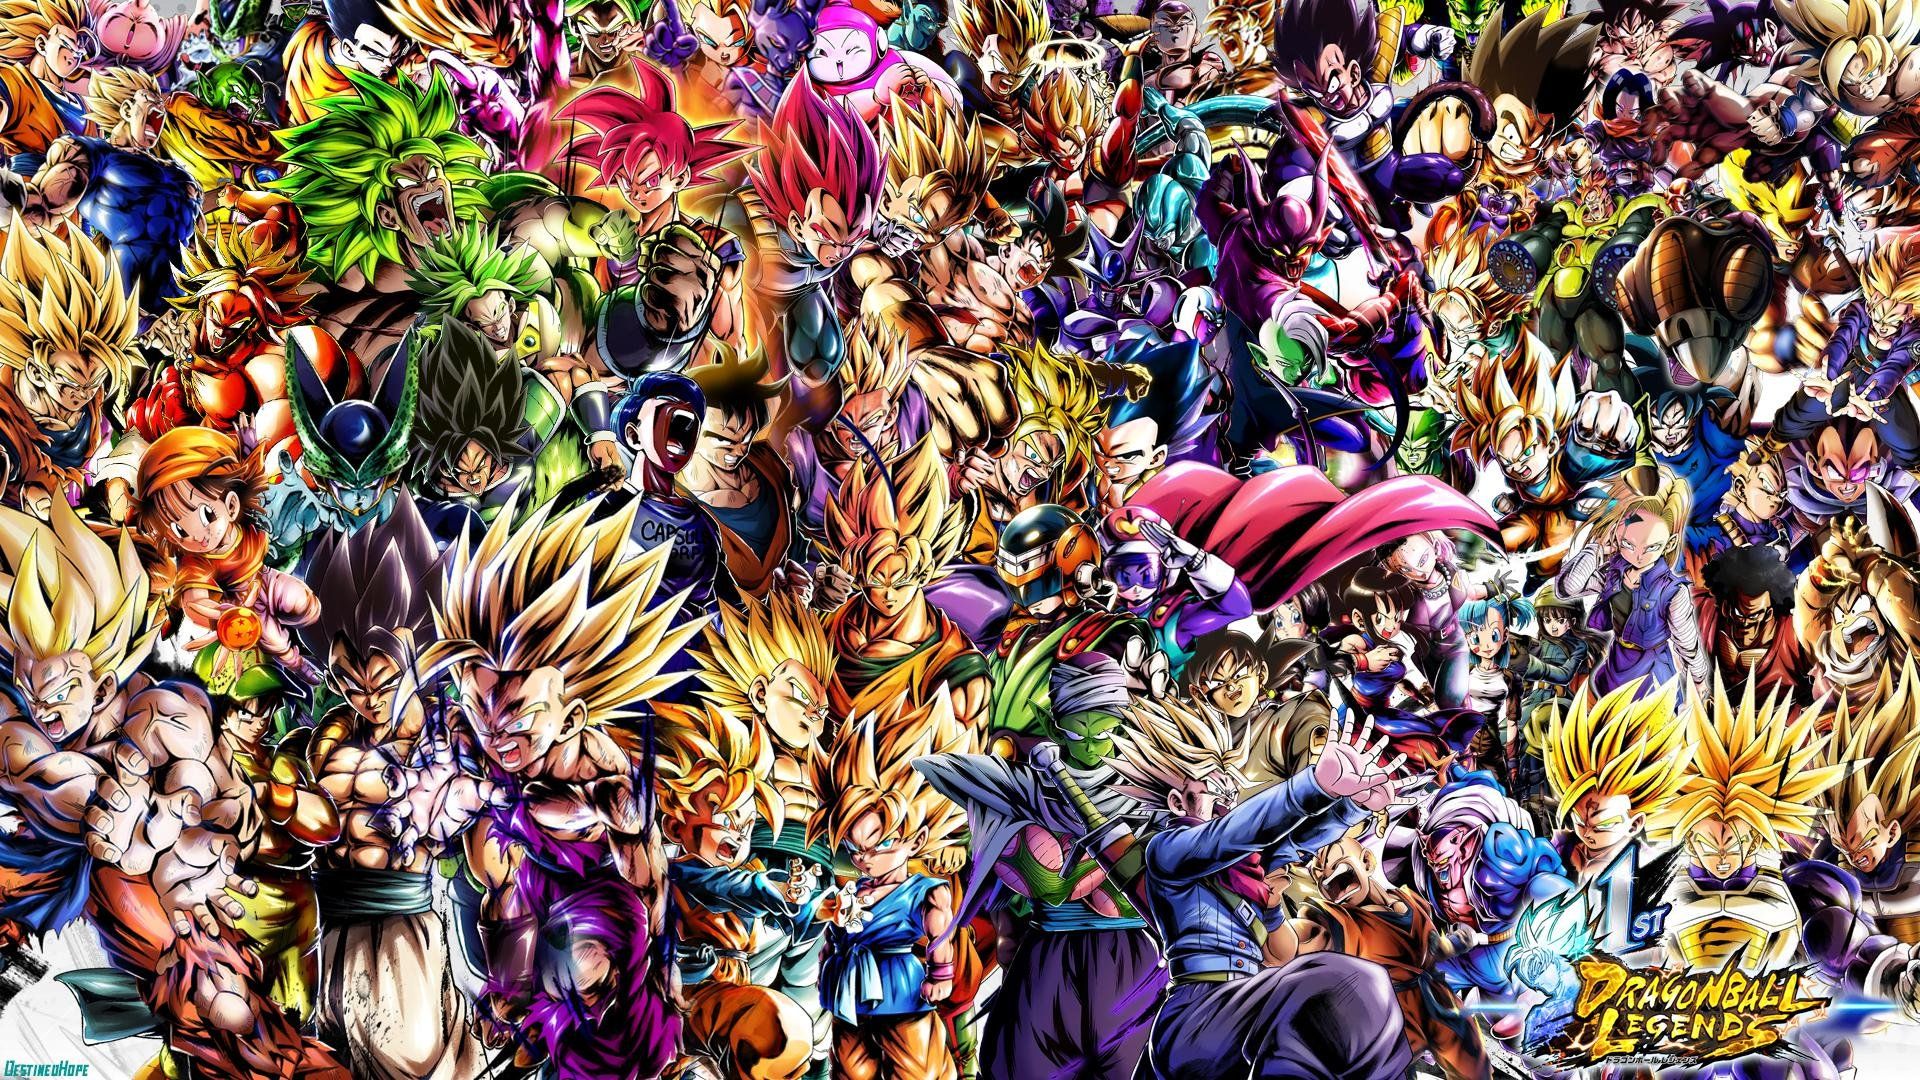 Dragon Ball Aesthetic Laptop Wallpapers - Wallpaper Cave